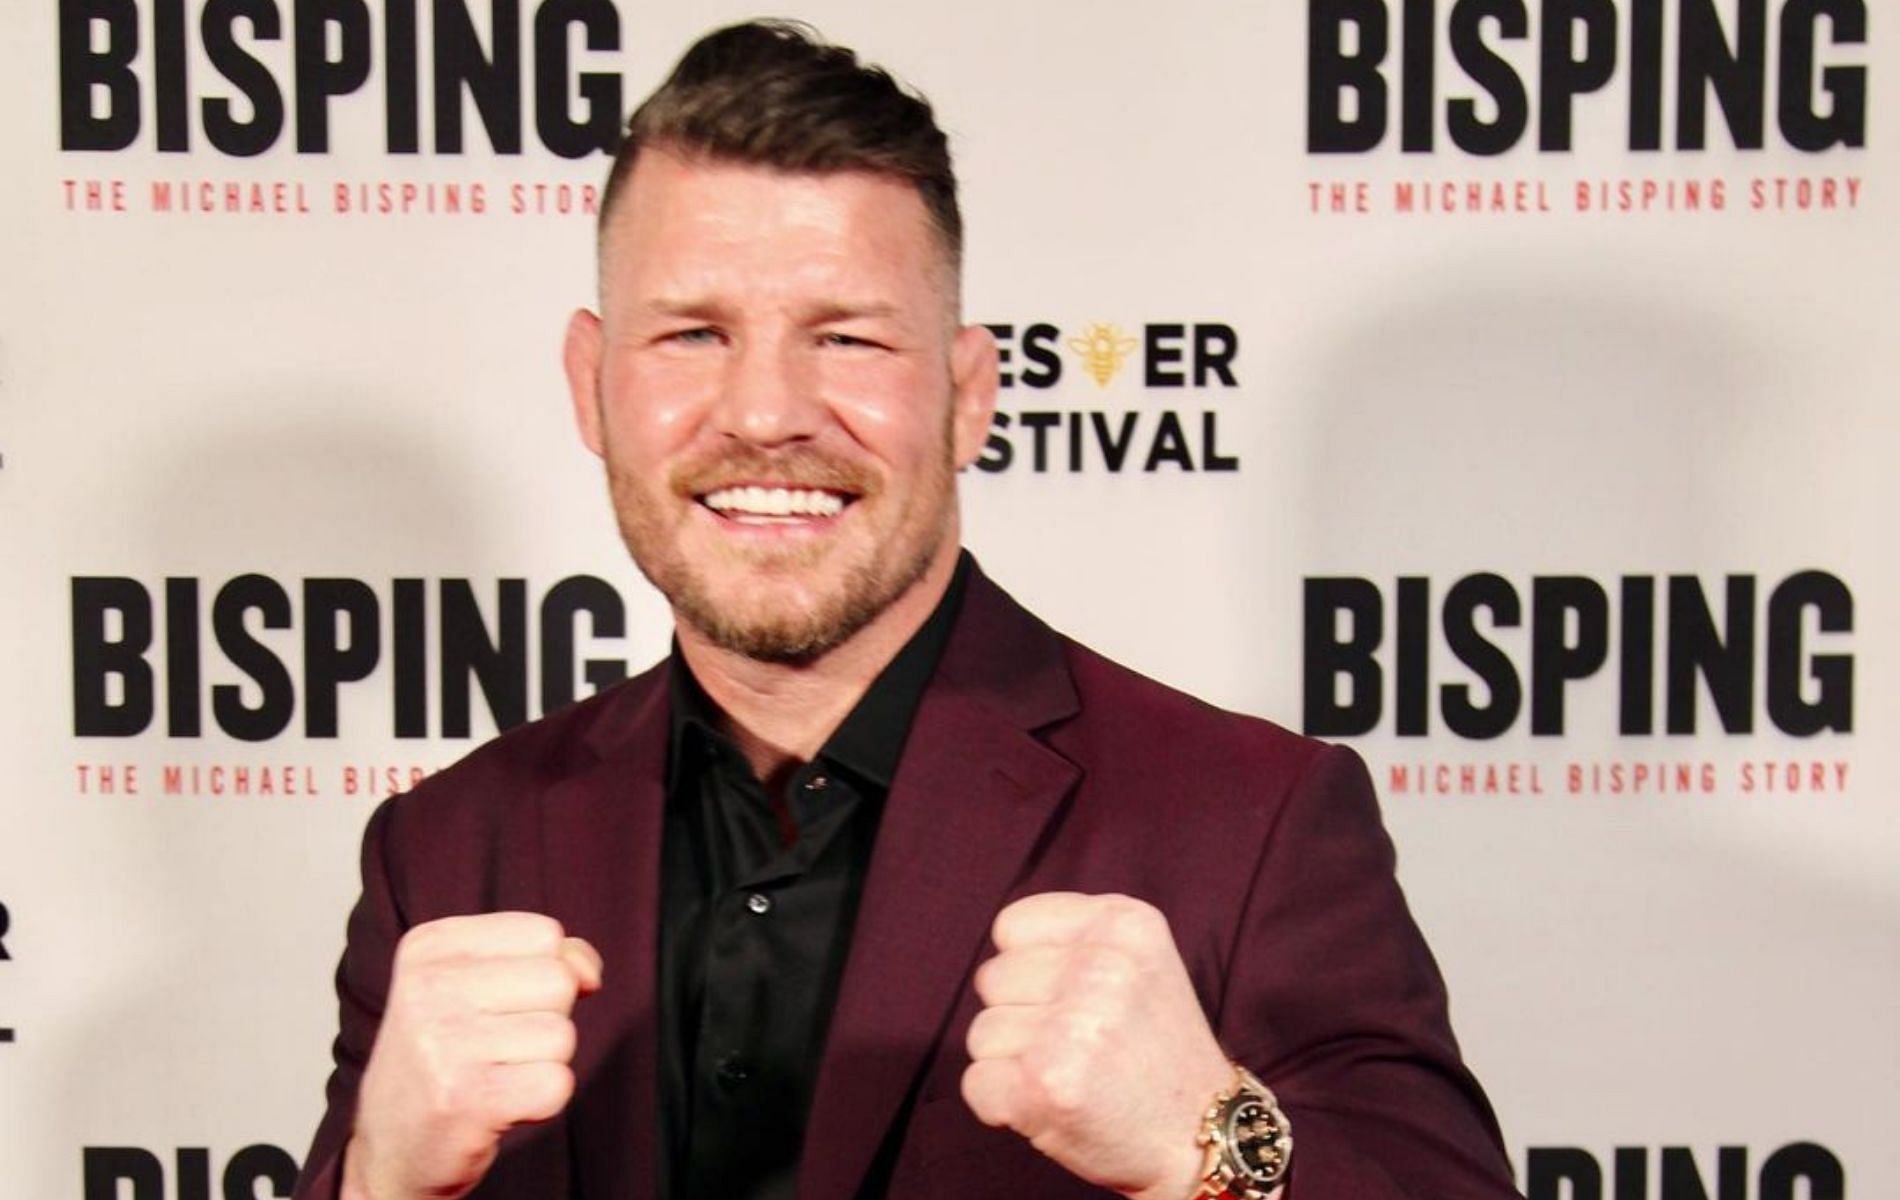 Michael Bisping [Image Credits- @mikebisping on Instagram]